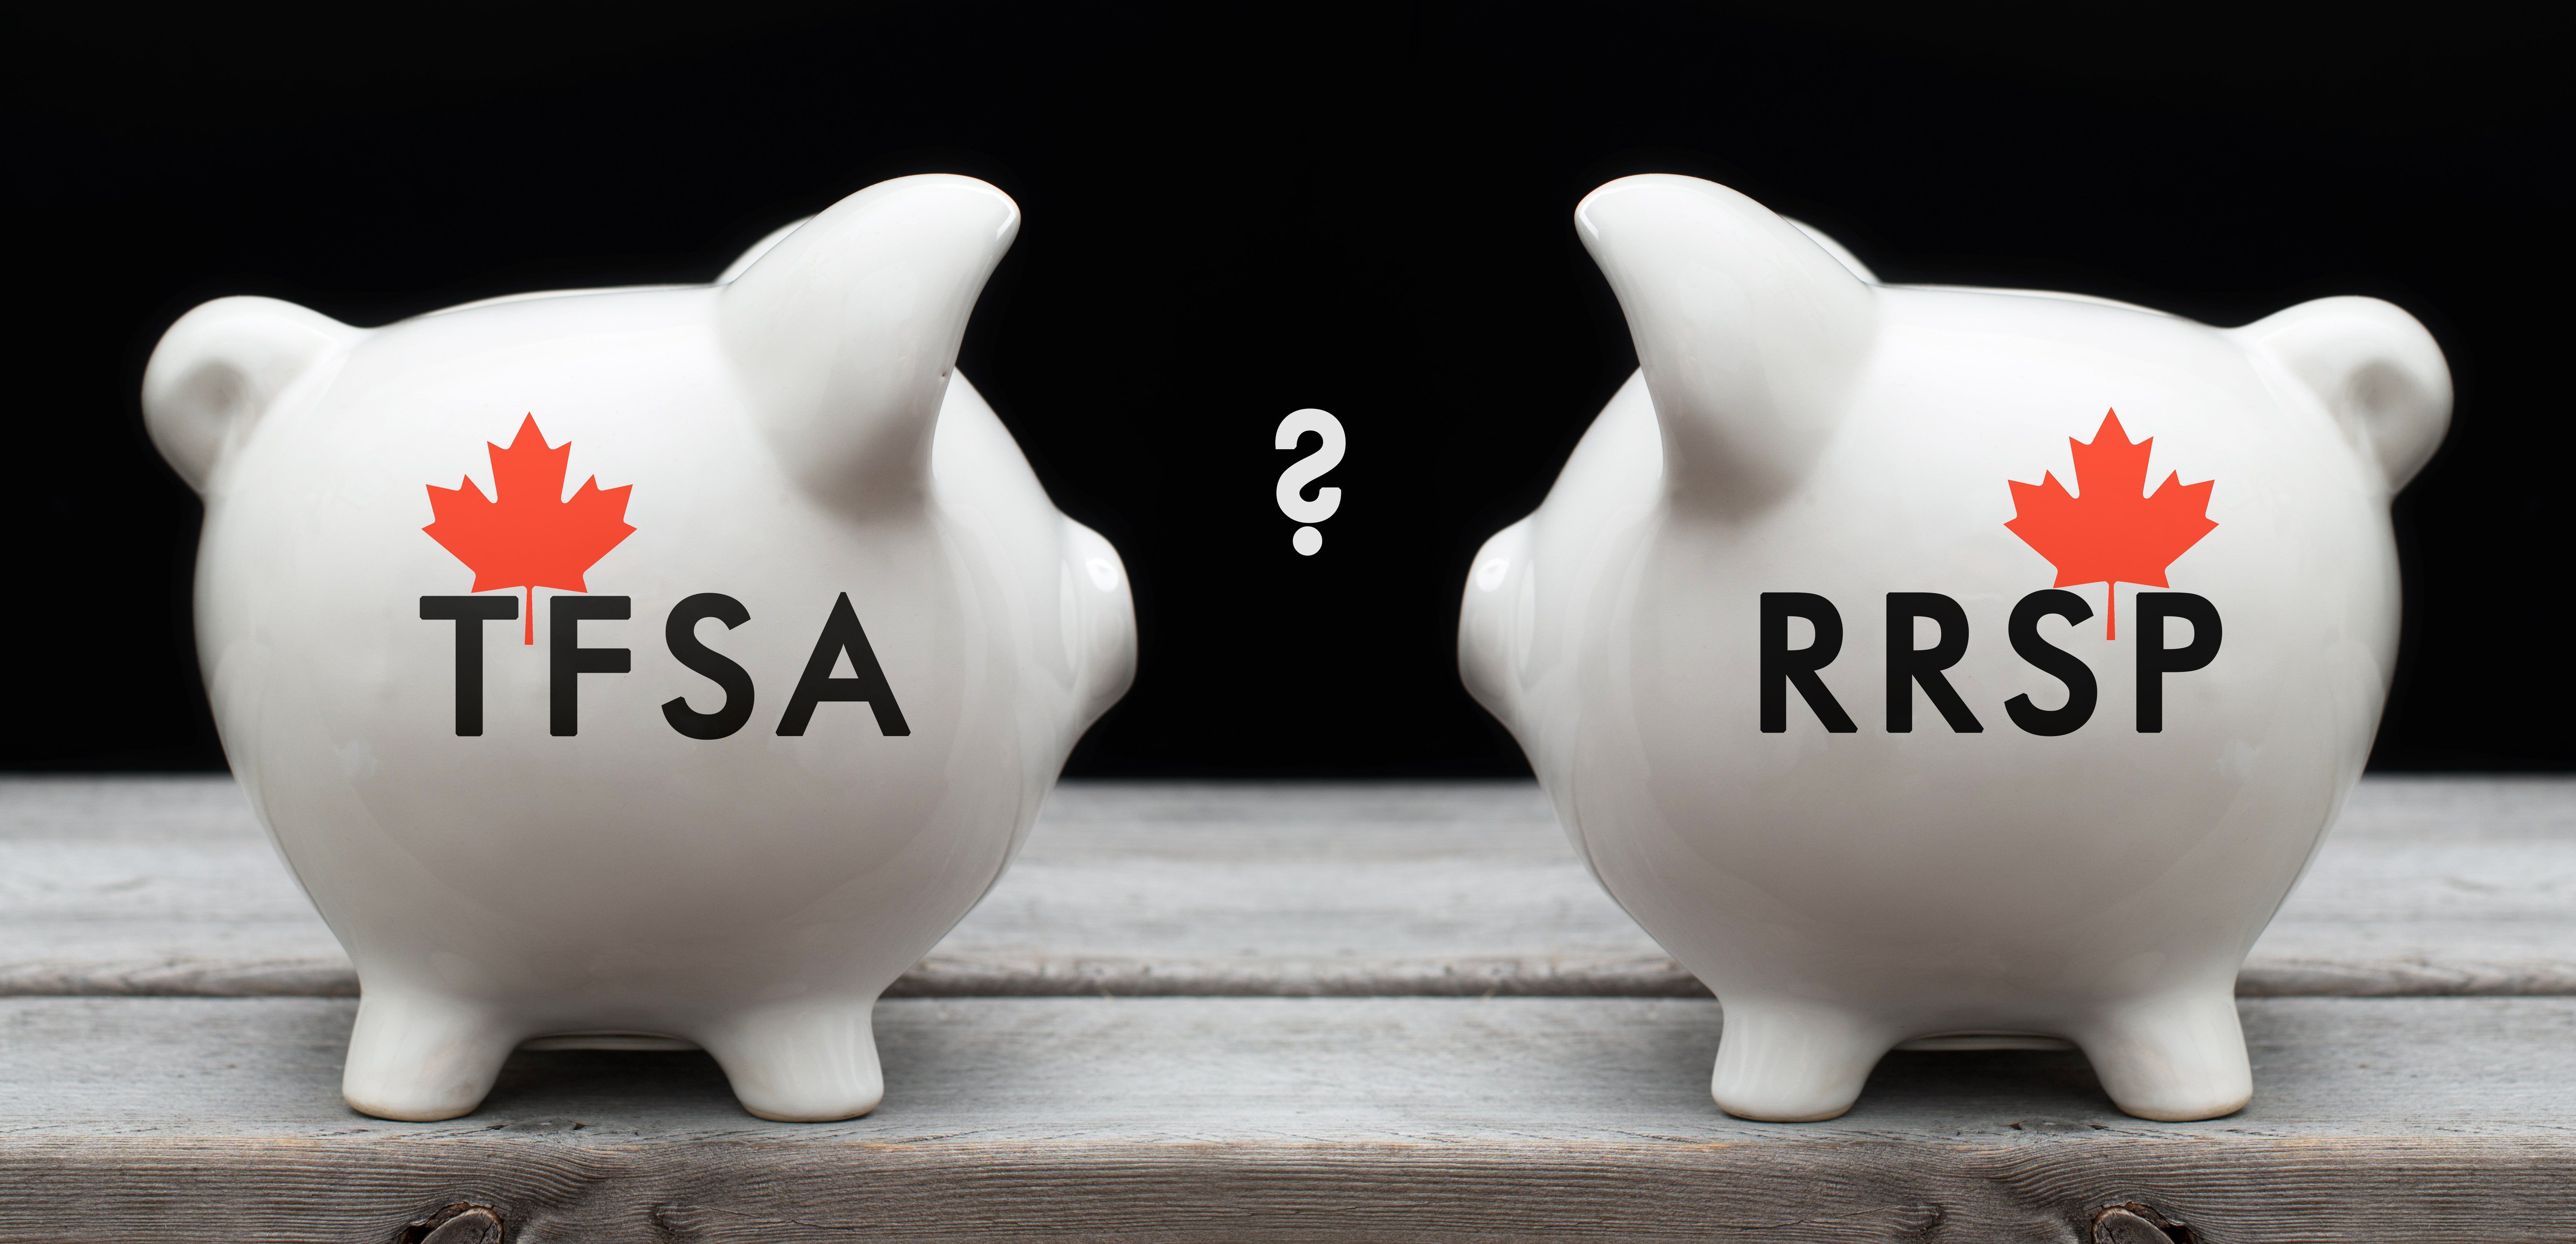 Piggie banks depicting the choice between investing in TFSA or RRSP for Canadians